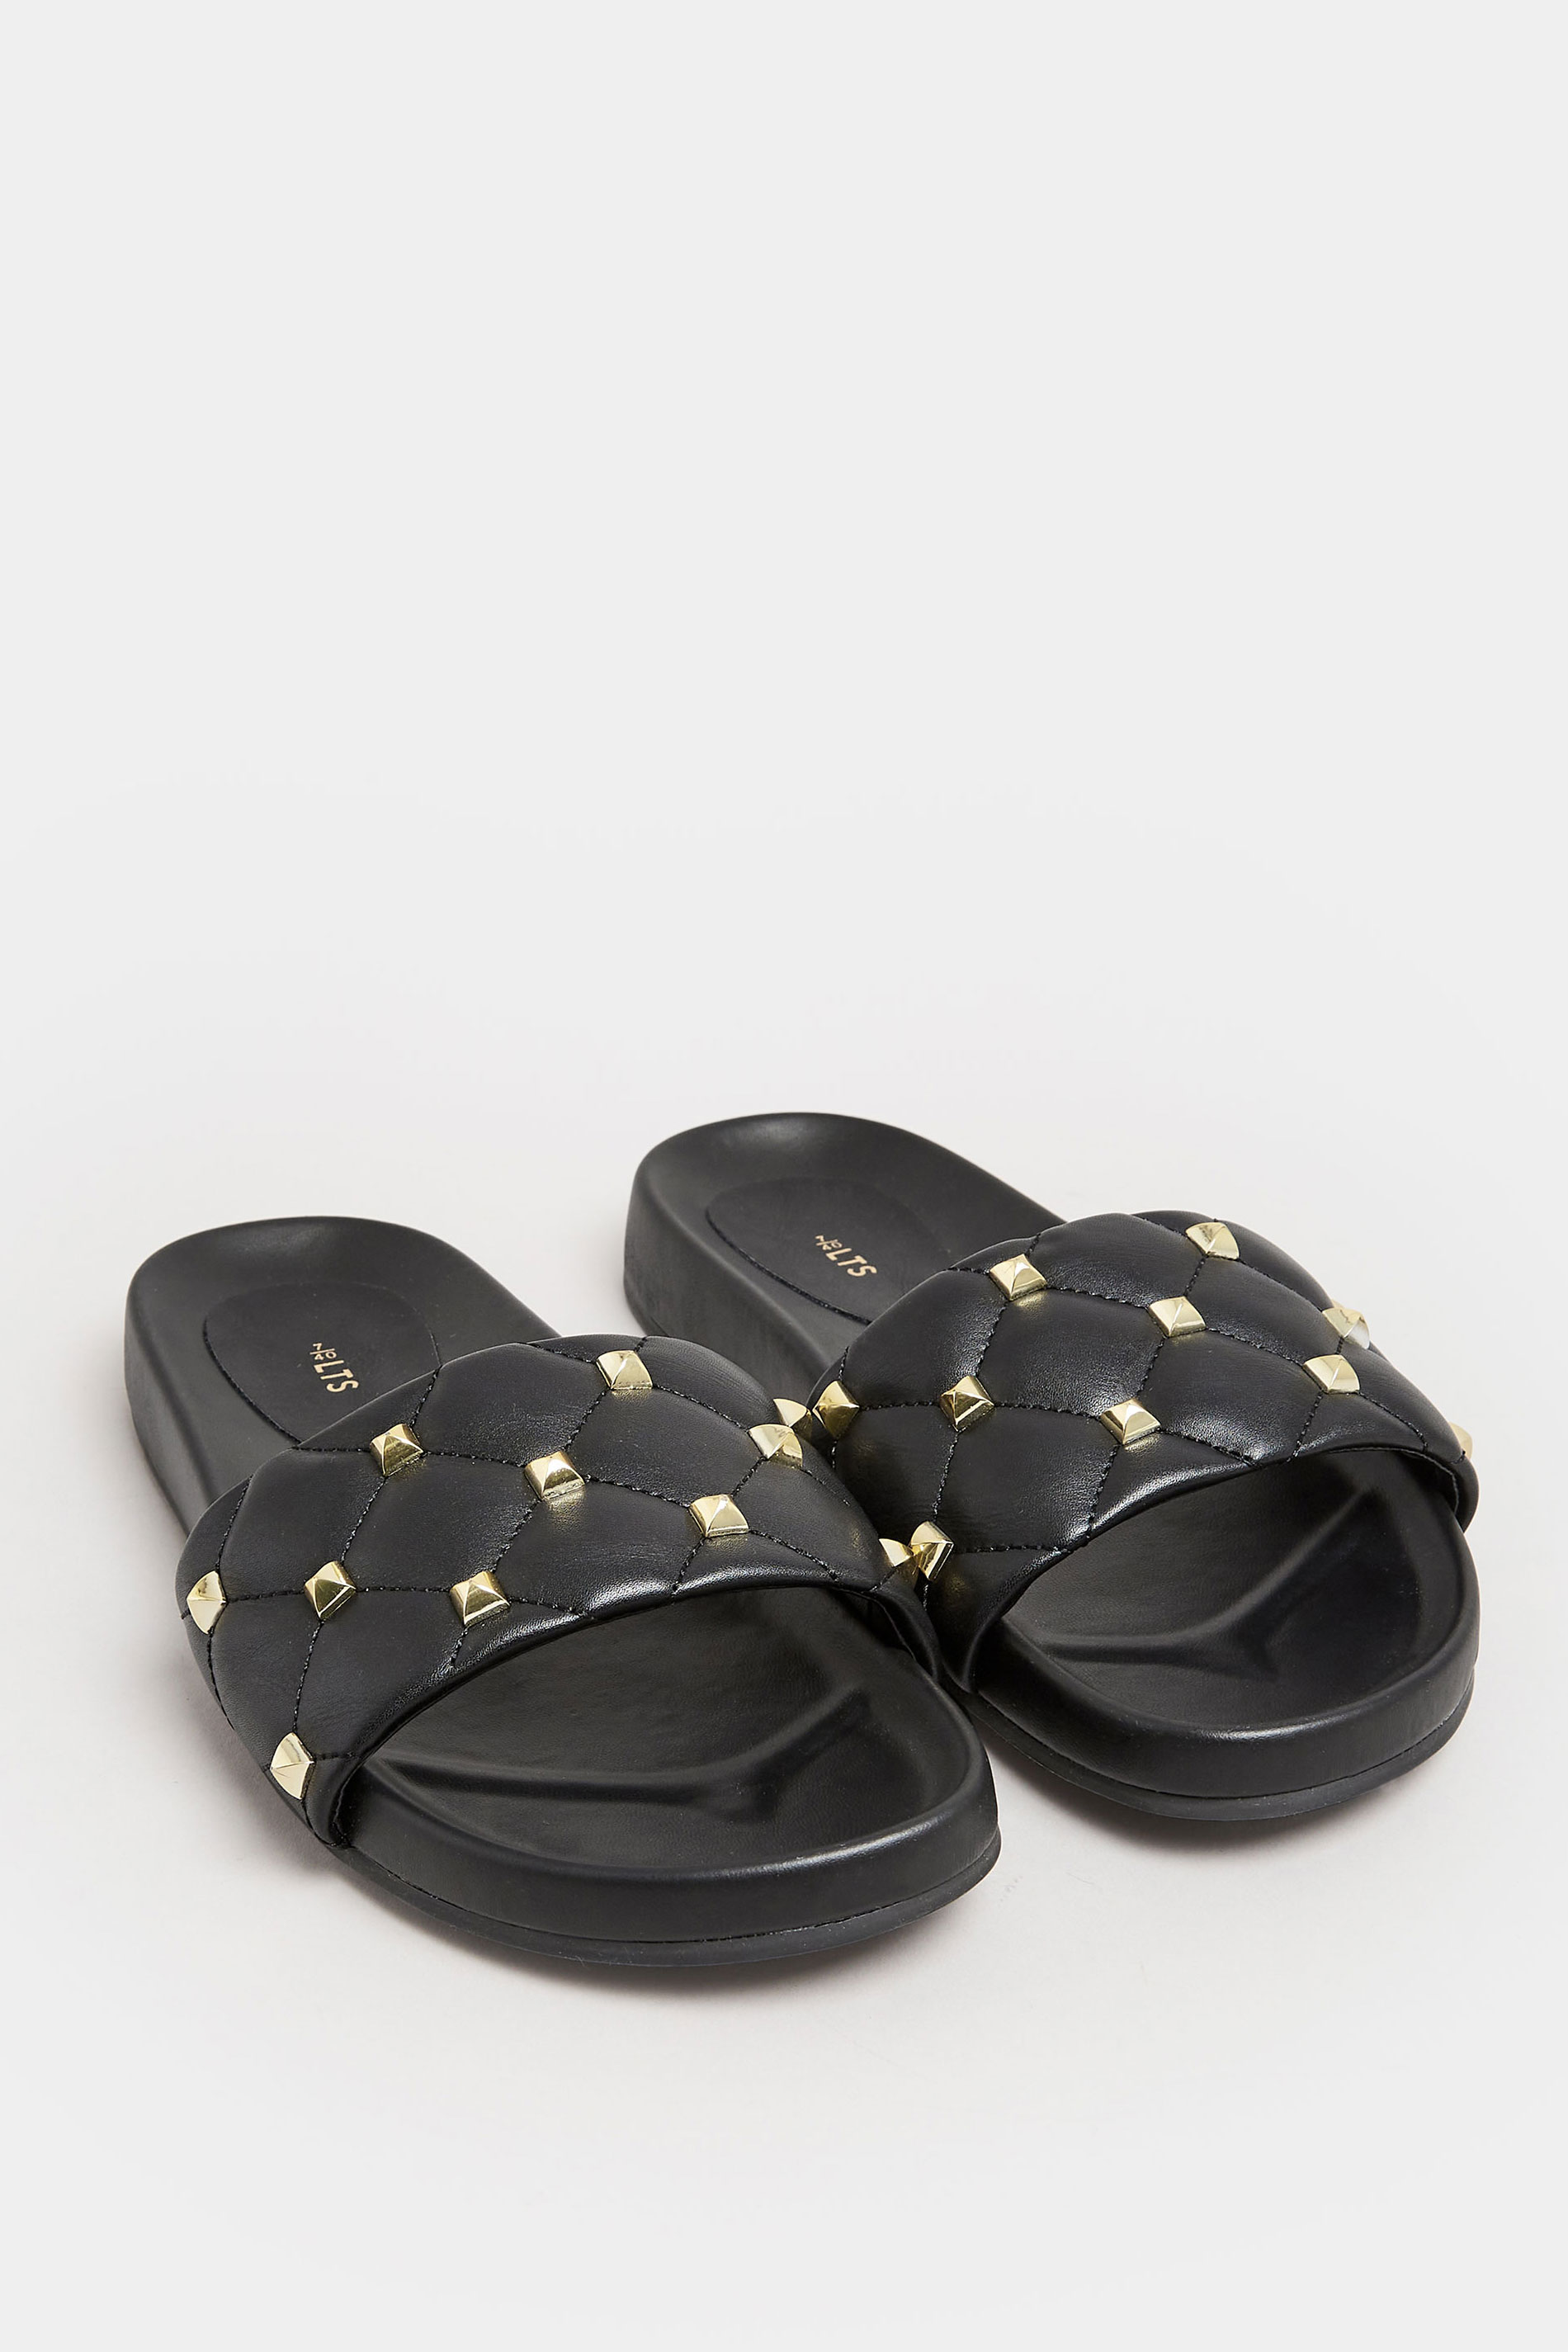 LTS Black Stud Quilted Sliders In Standard Fit | Long Tall Sally 2